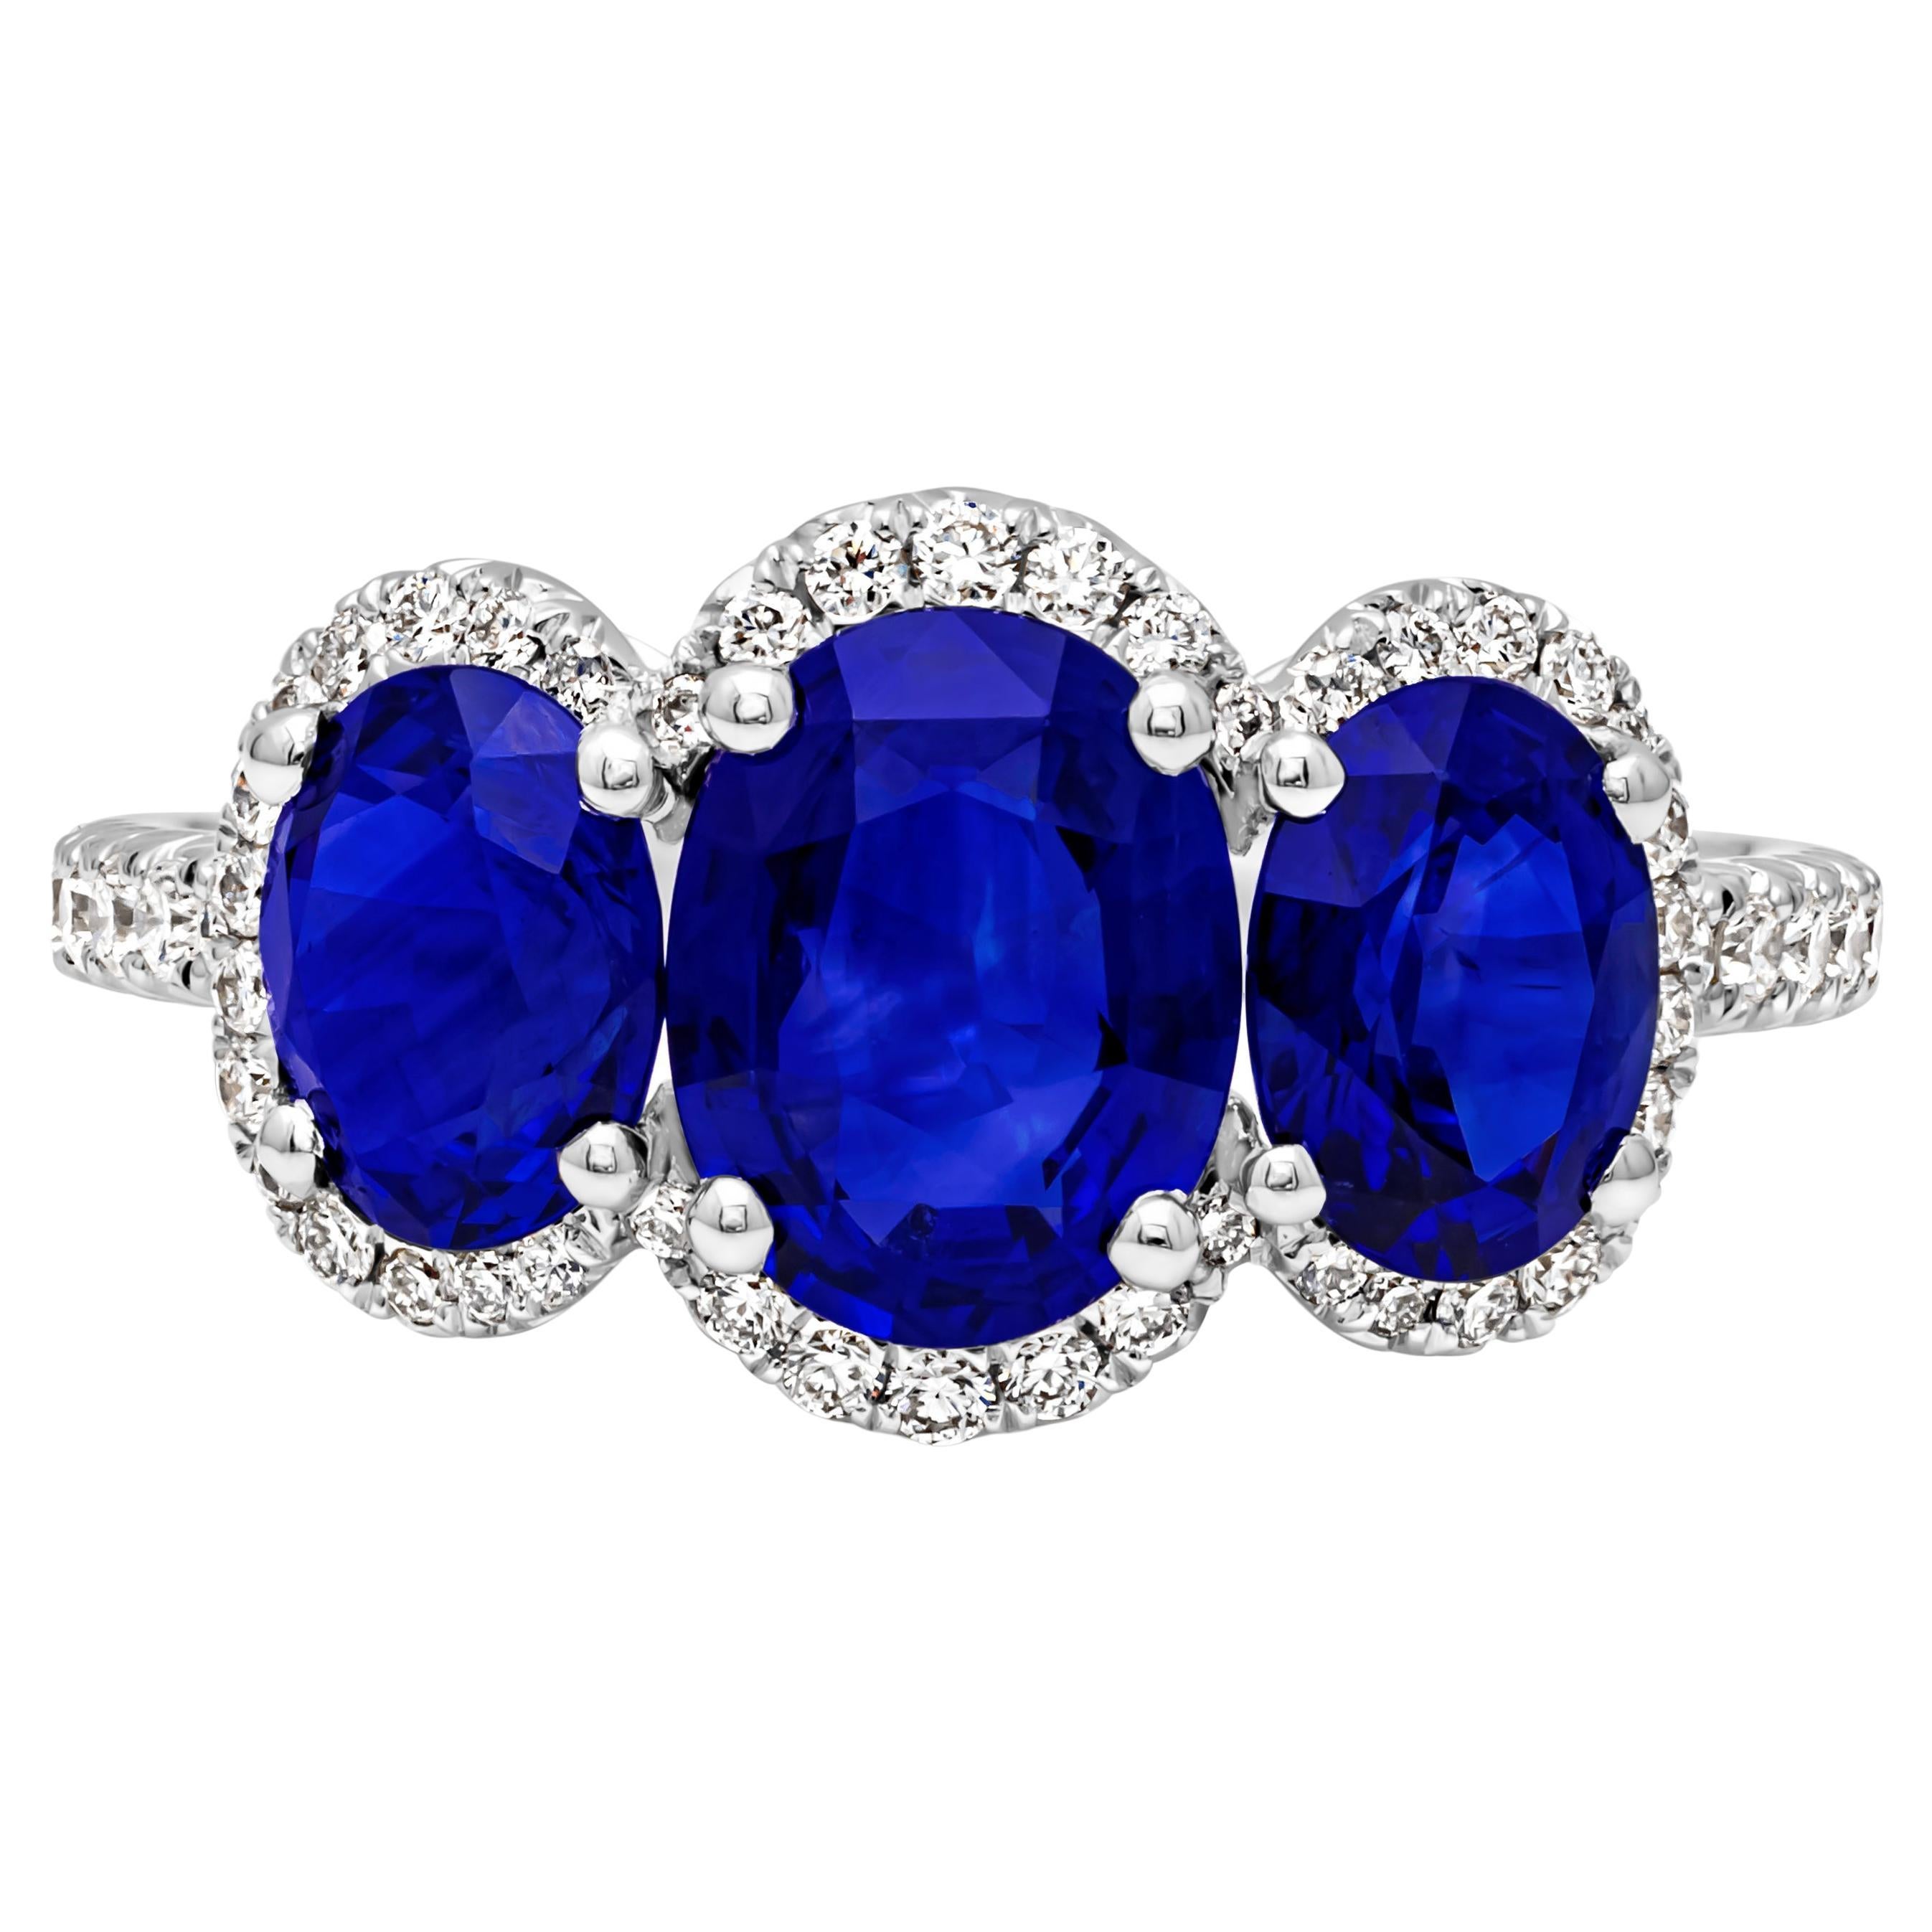 3.40 Carats Total Oval Cut Blue Sapphire & Diamond Three-Stone Engagement Ring For Sale